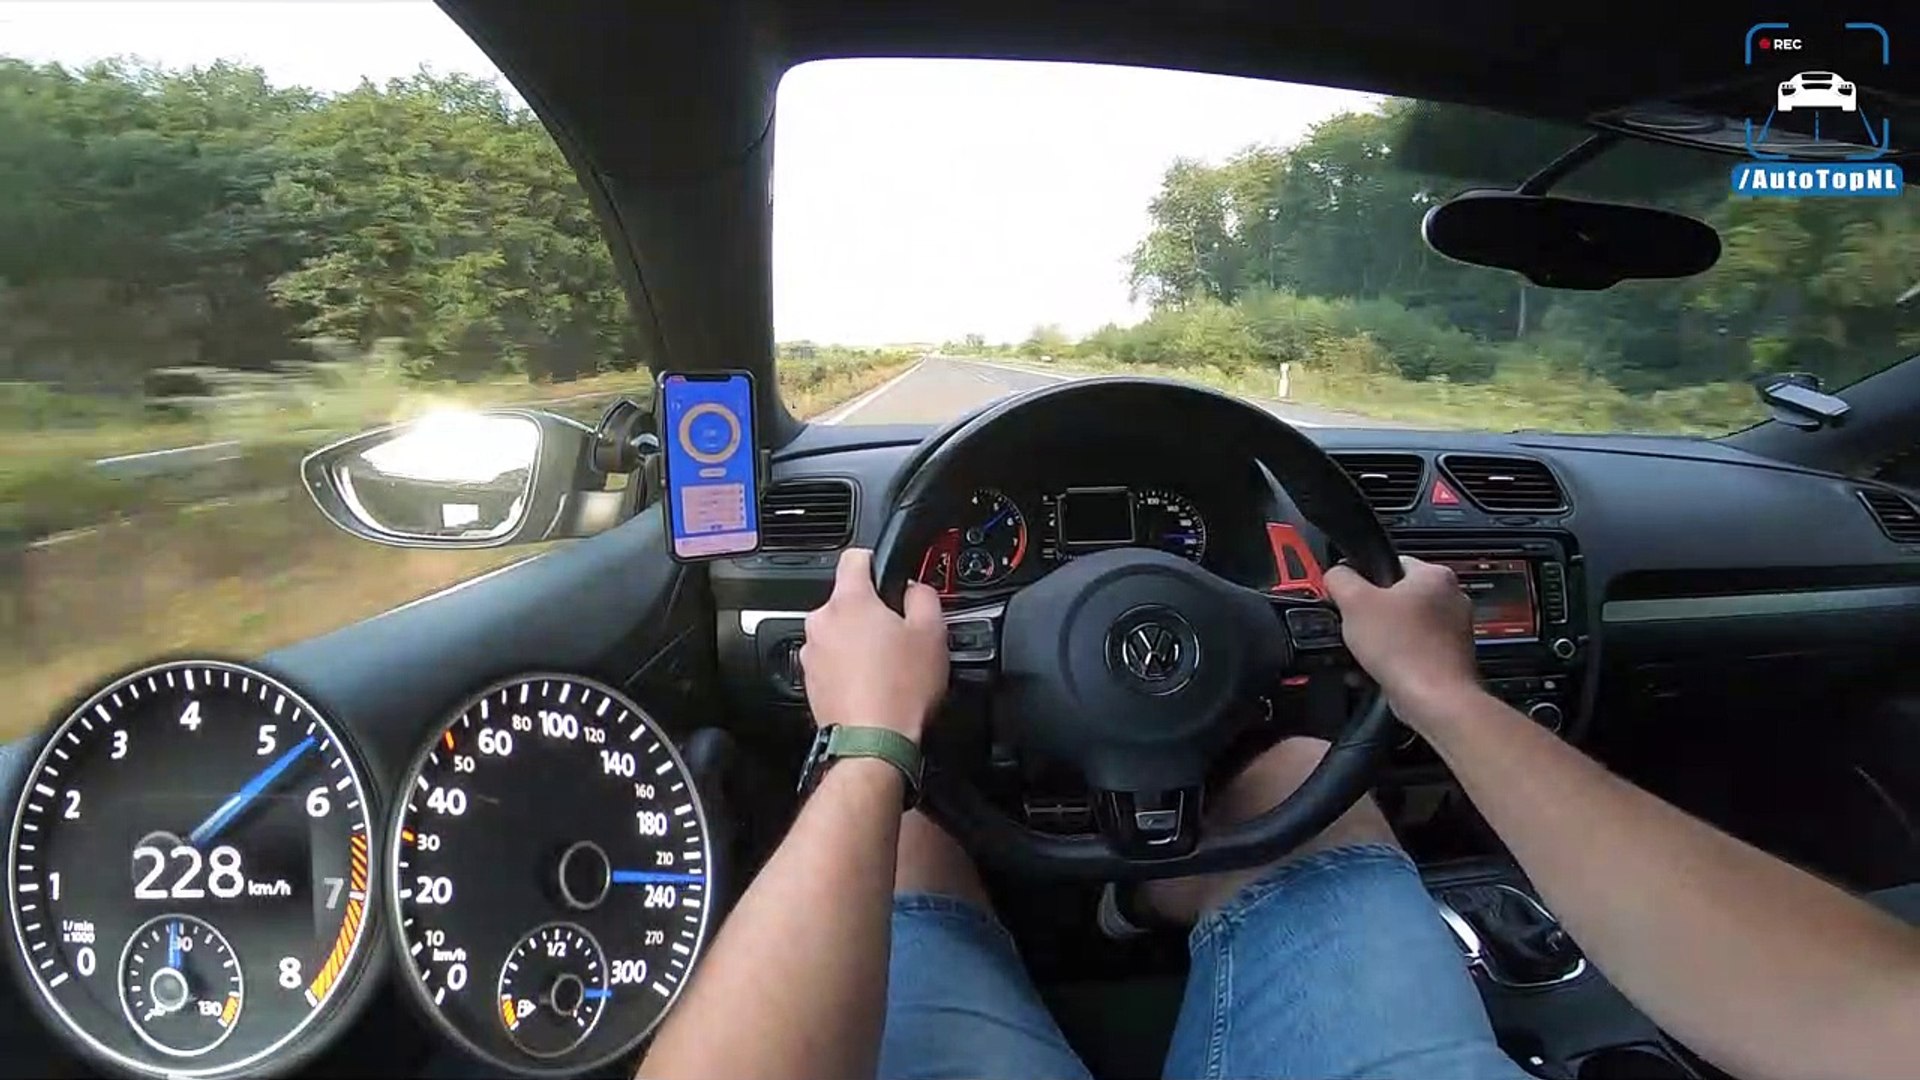 VW Lupo With 2.0 Turbo Looks Nervous At 158 MPH On The Autobahn